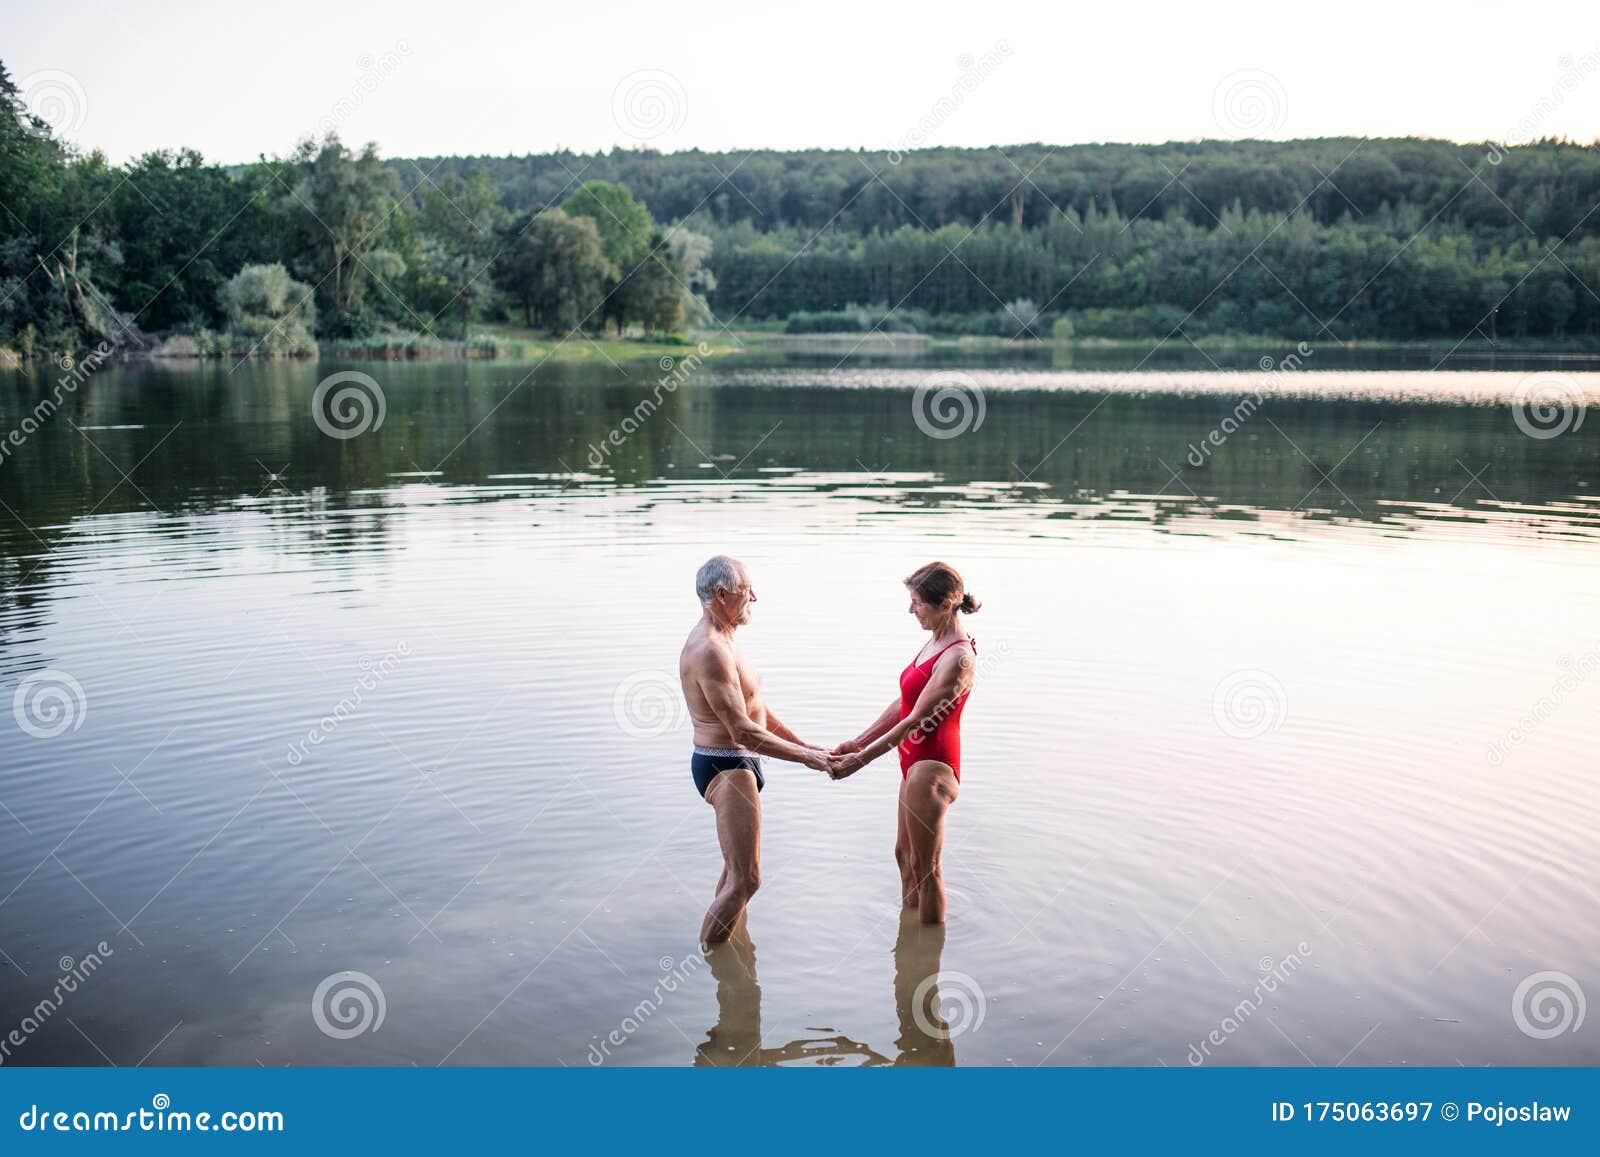 Senior Couple In Swimsuit Standing In Lake Outdoors Before Swimming